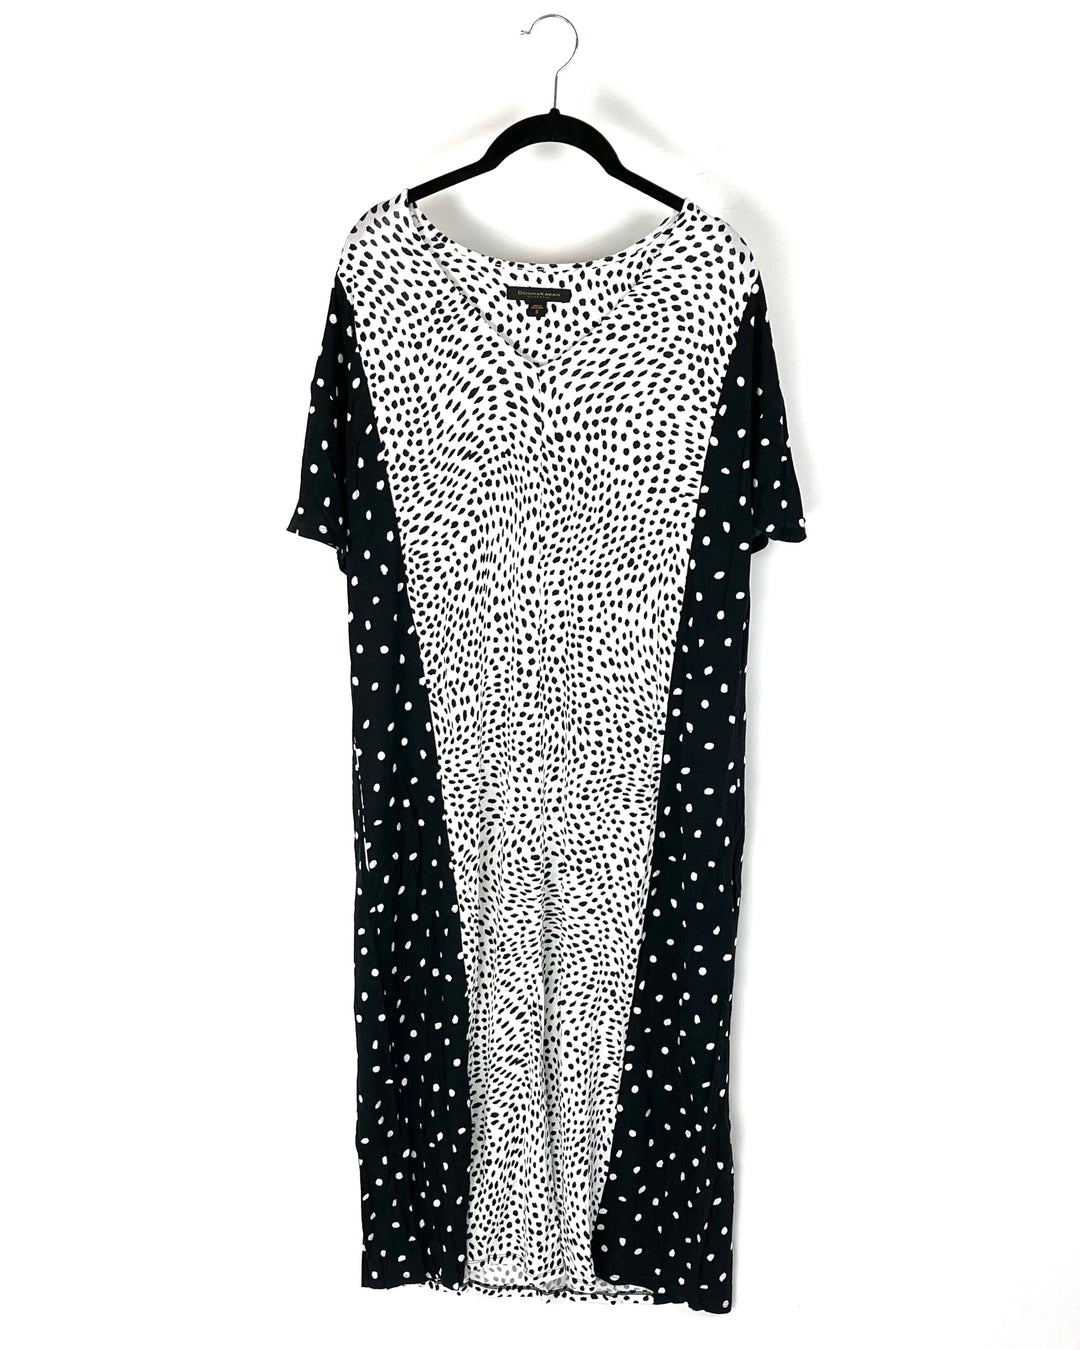 Black and White Sleepwear Gown - Small